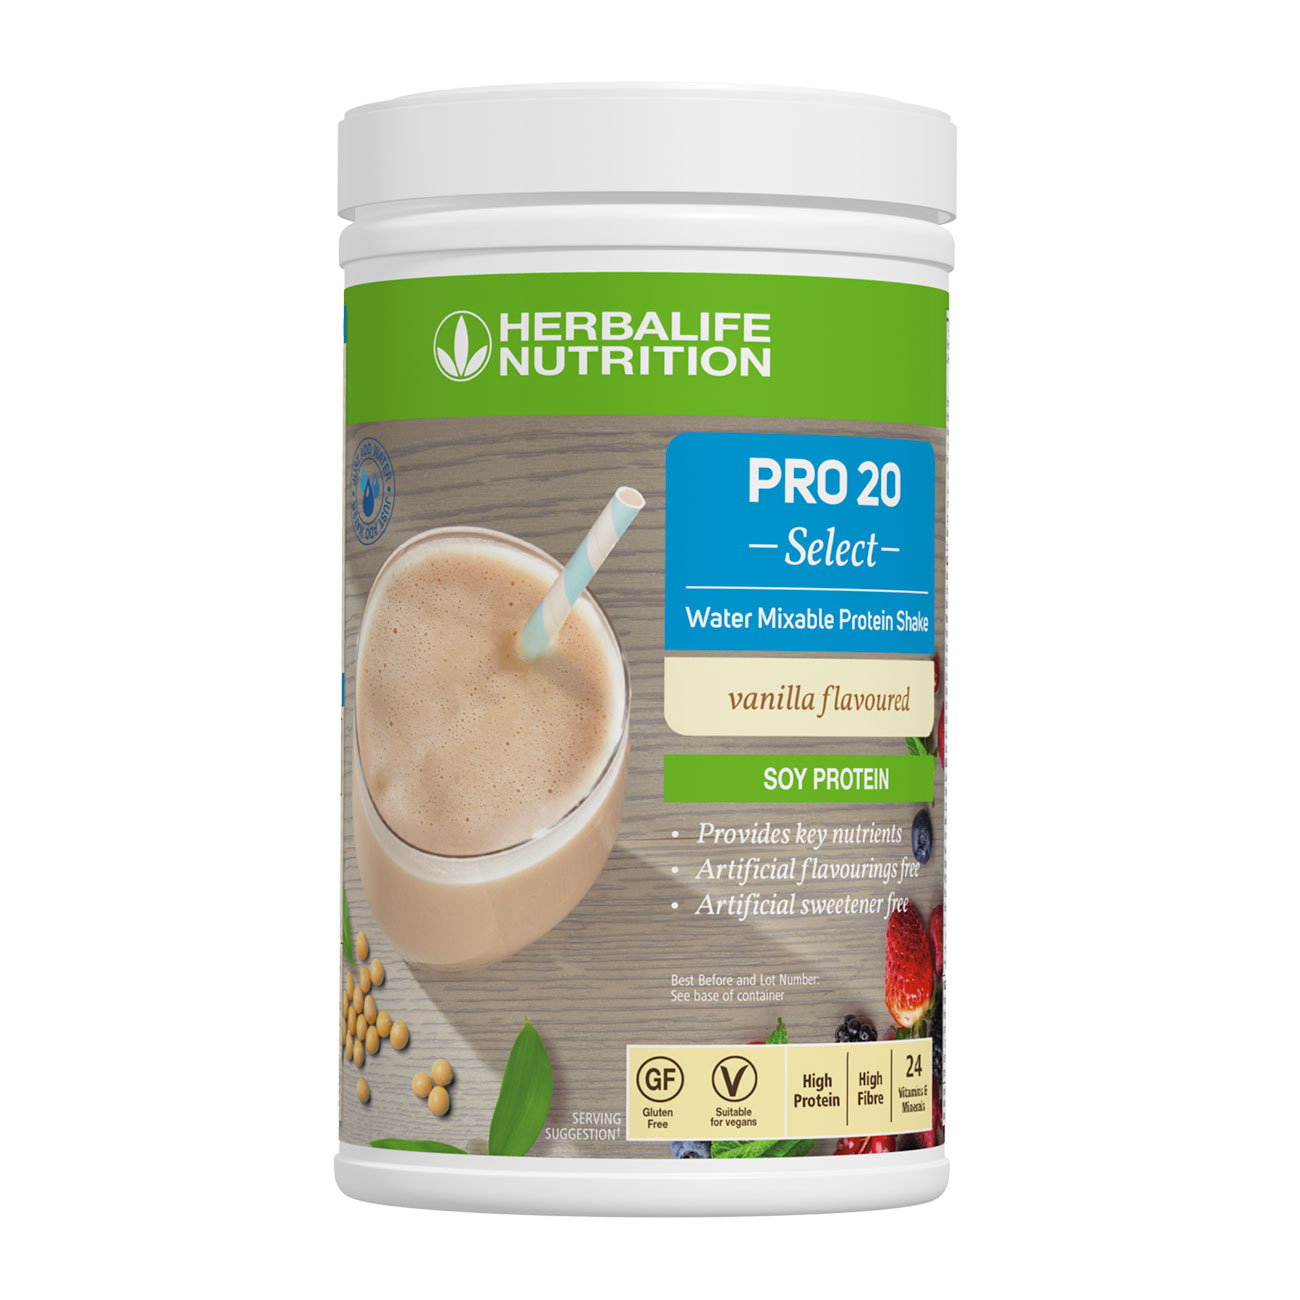 PRO 20 Select Water Mixable Protein Shake Vanilla Flavoured product shot